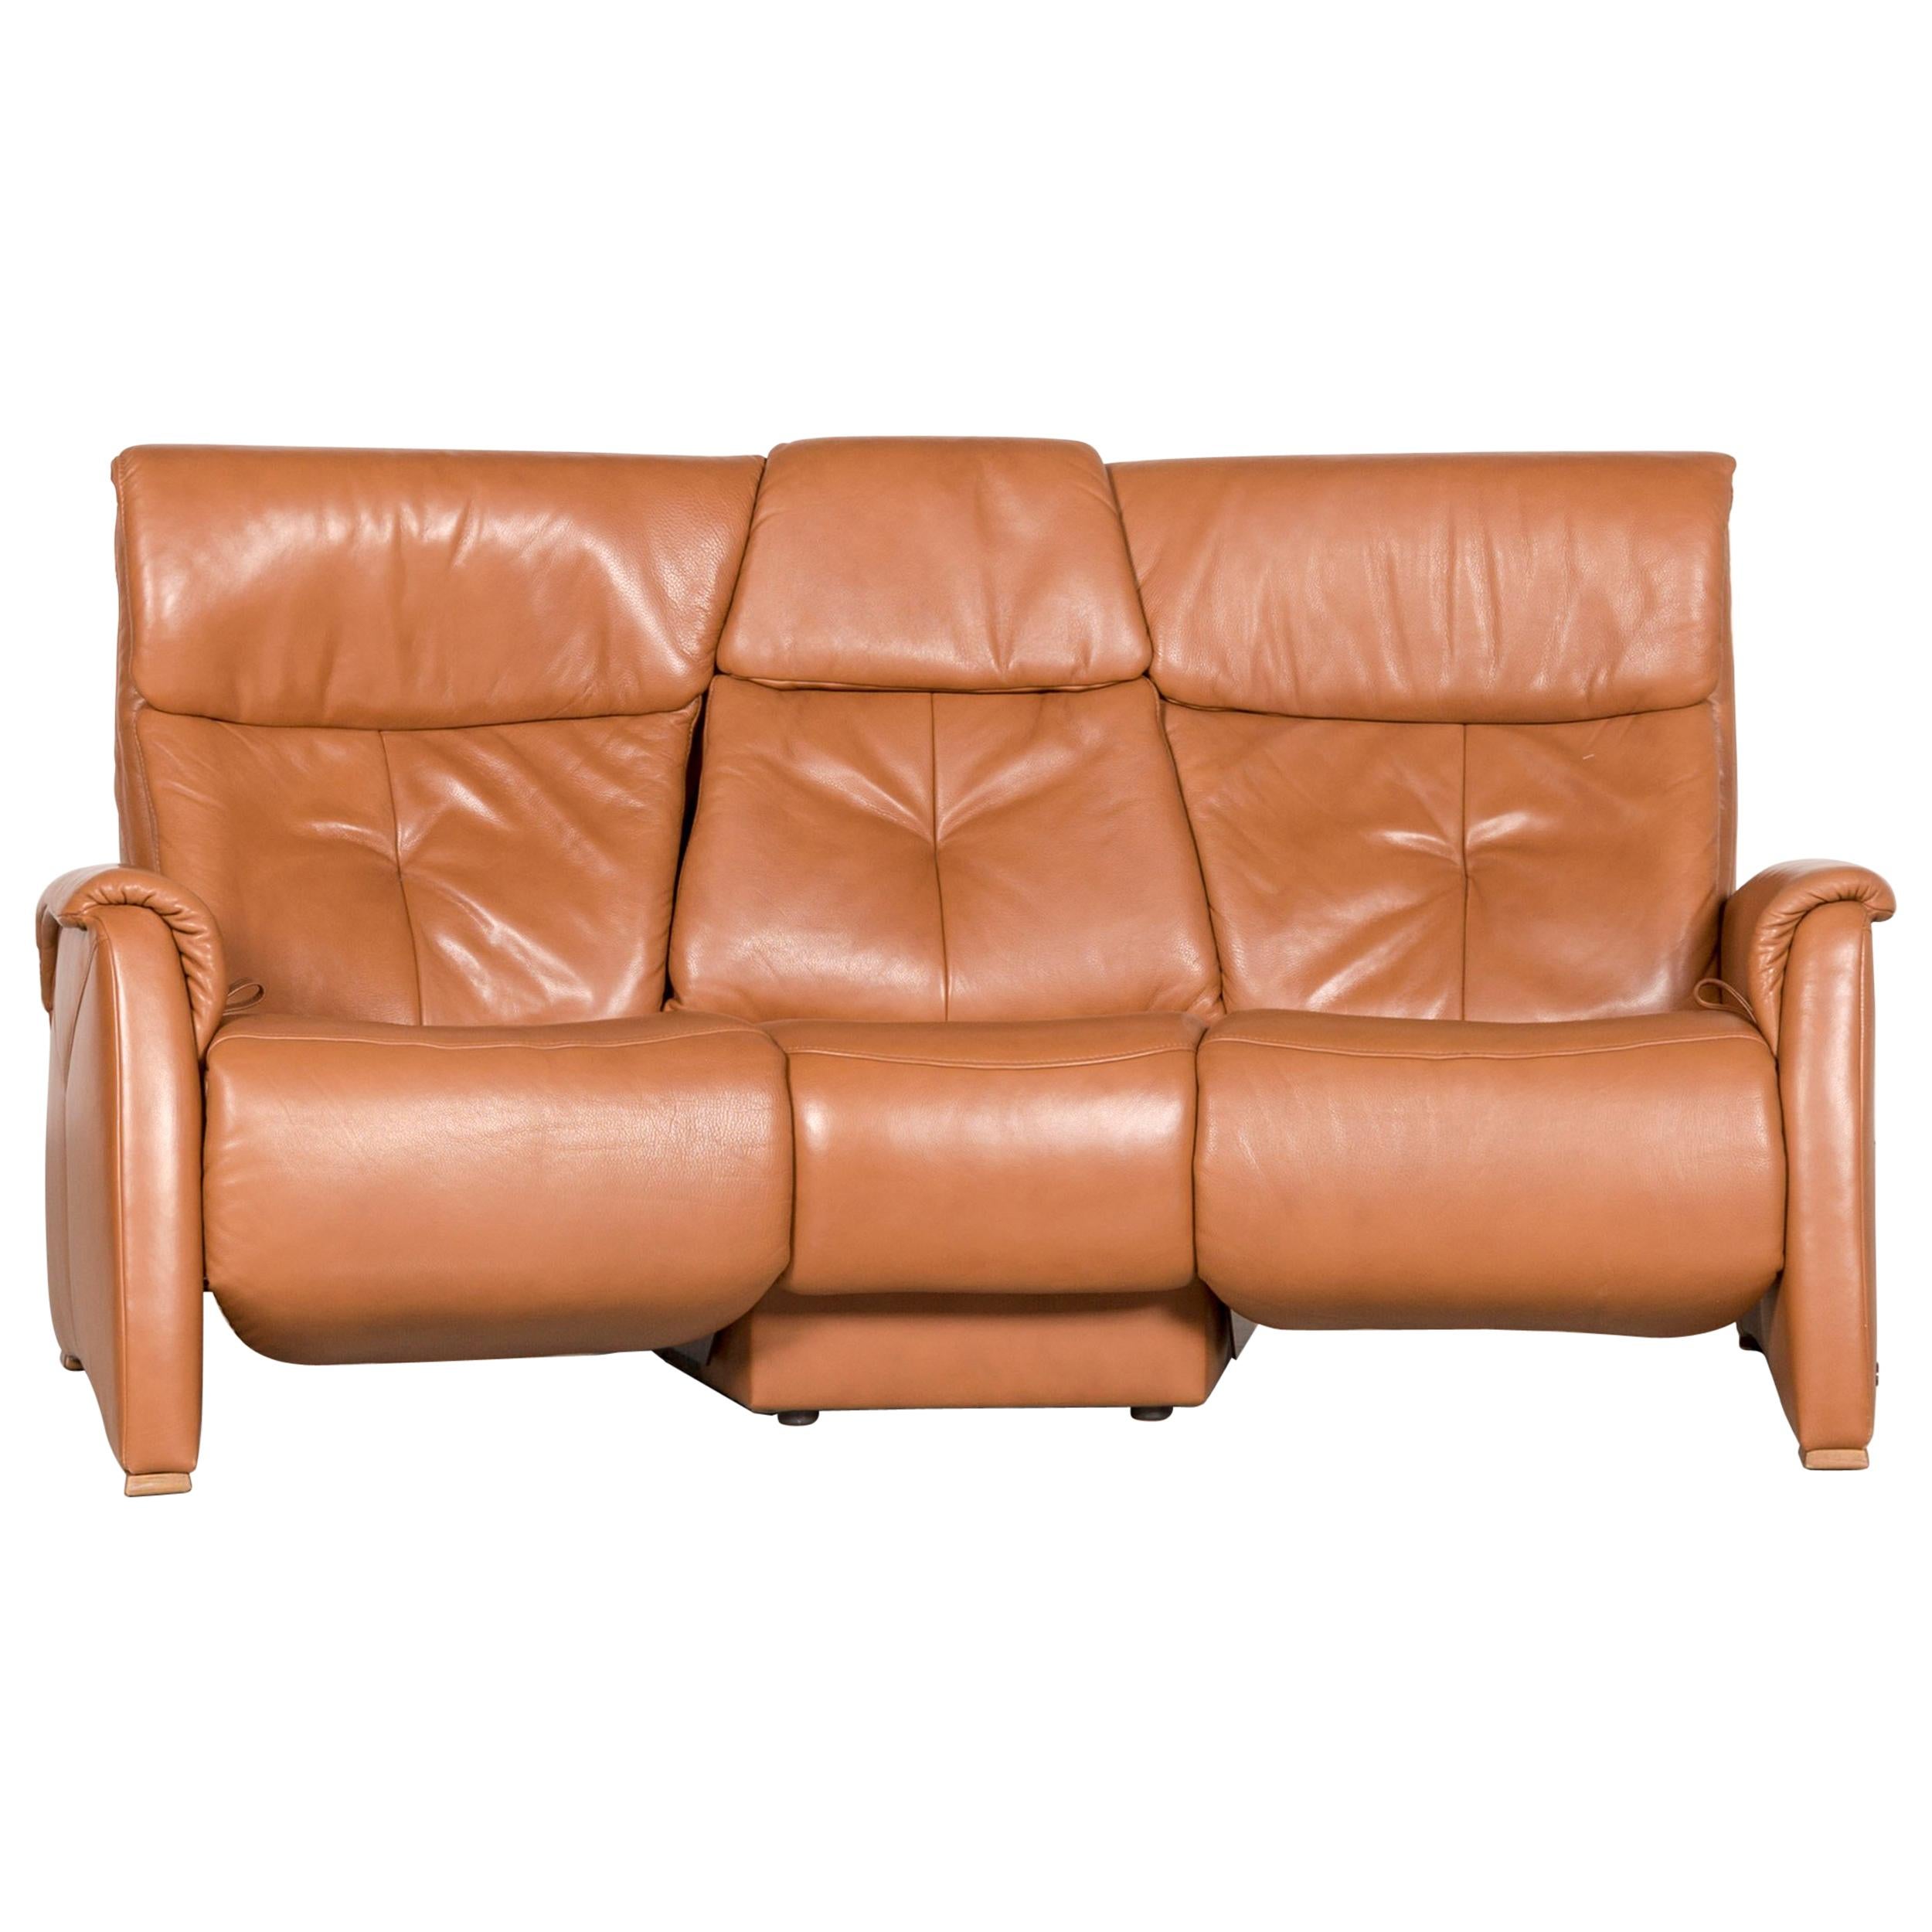 Himolla Designer Sofa Brown Leather Three-Seat Couch Recliner Function For Sale